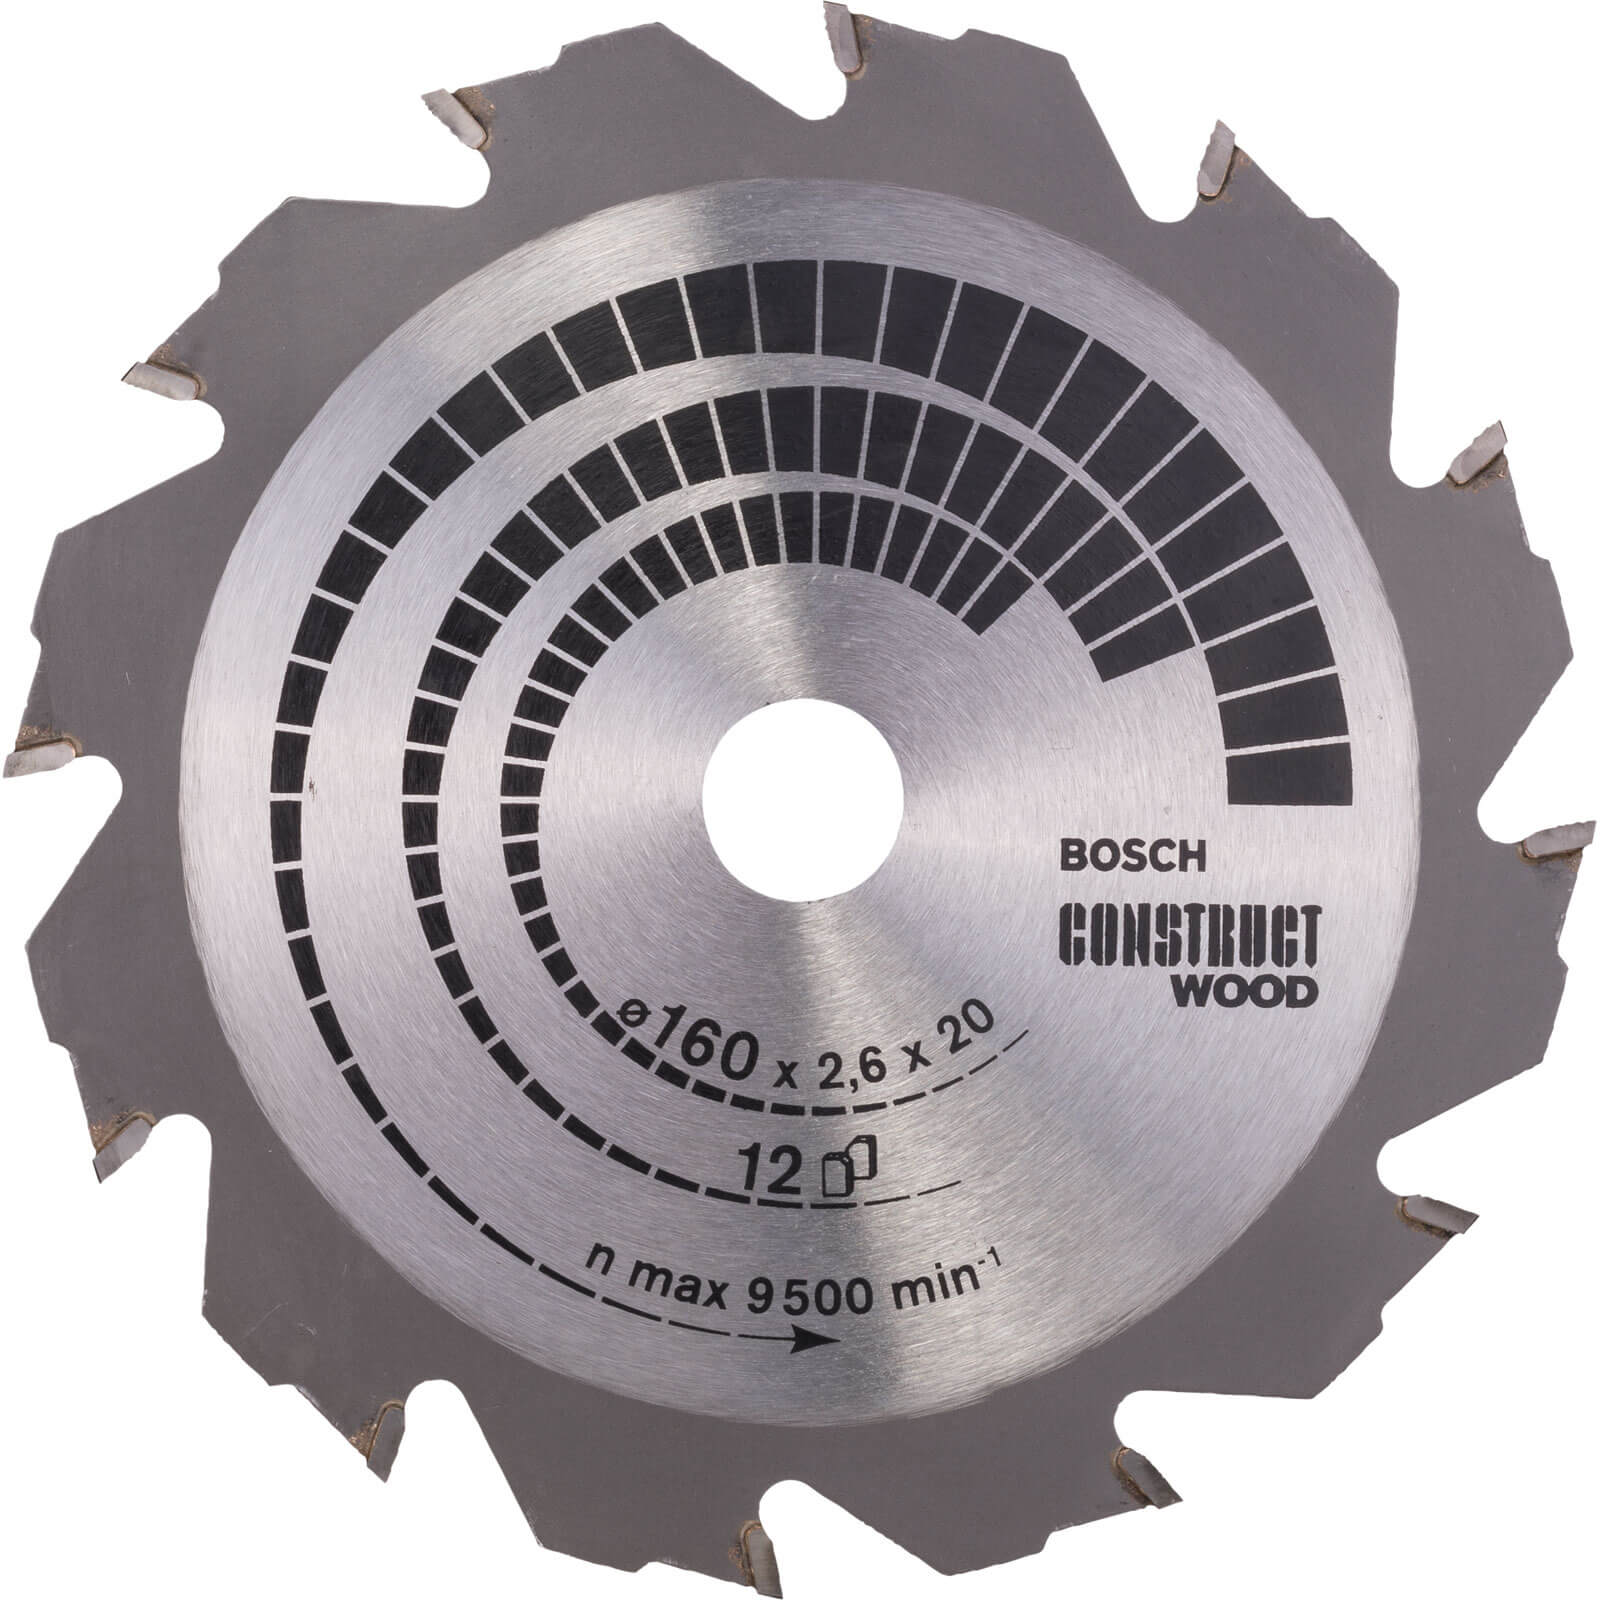 Photo of Bosch Construct Wood Cutting Saw Blade 160mm 12t 20mm